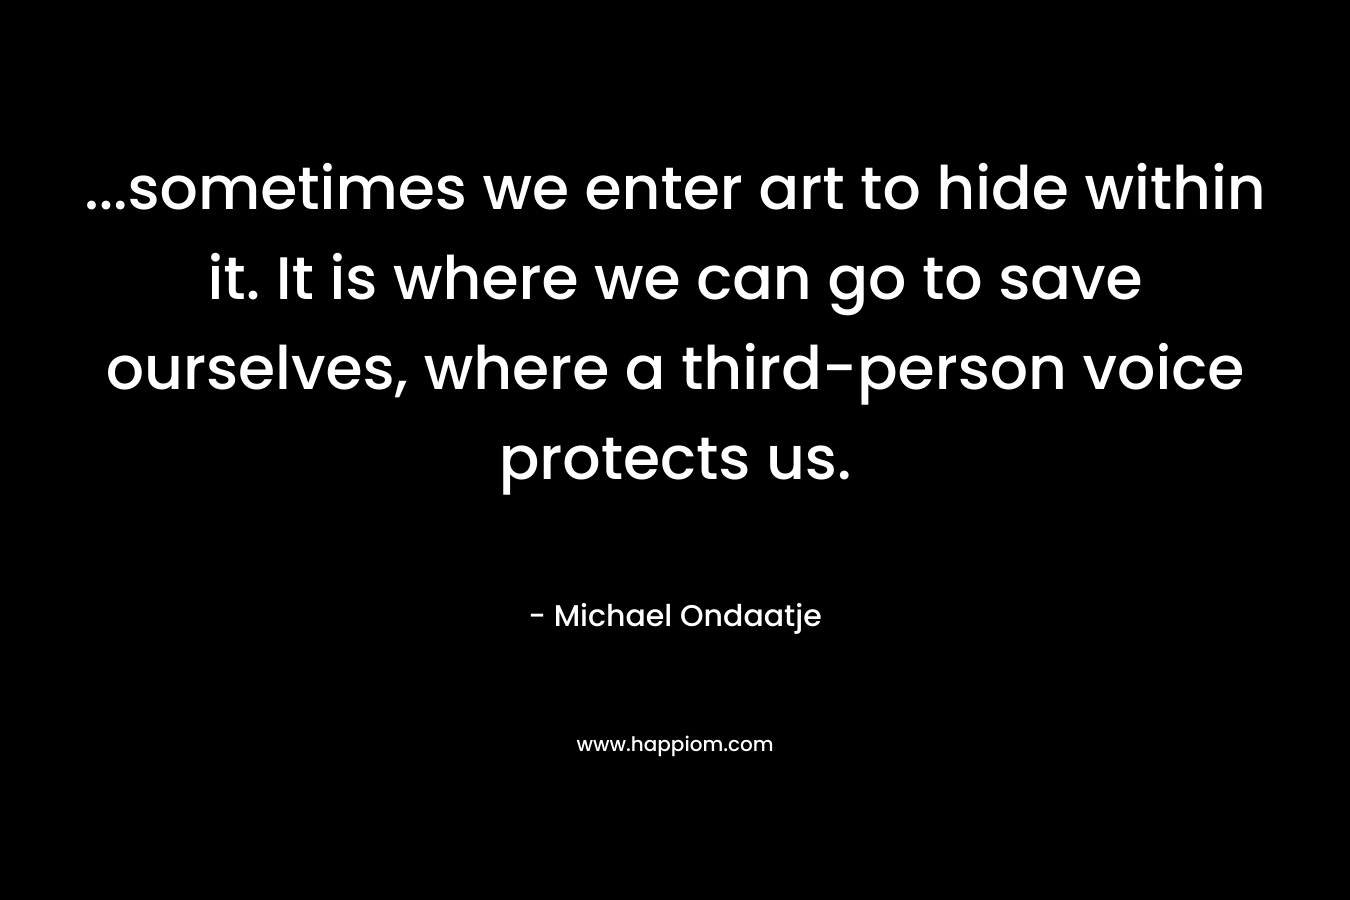 …sometimes we enter art to hide within it. It is where we can go to save ourselves, where a third-person voice protects us. – Michael Ondaatje